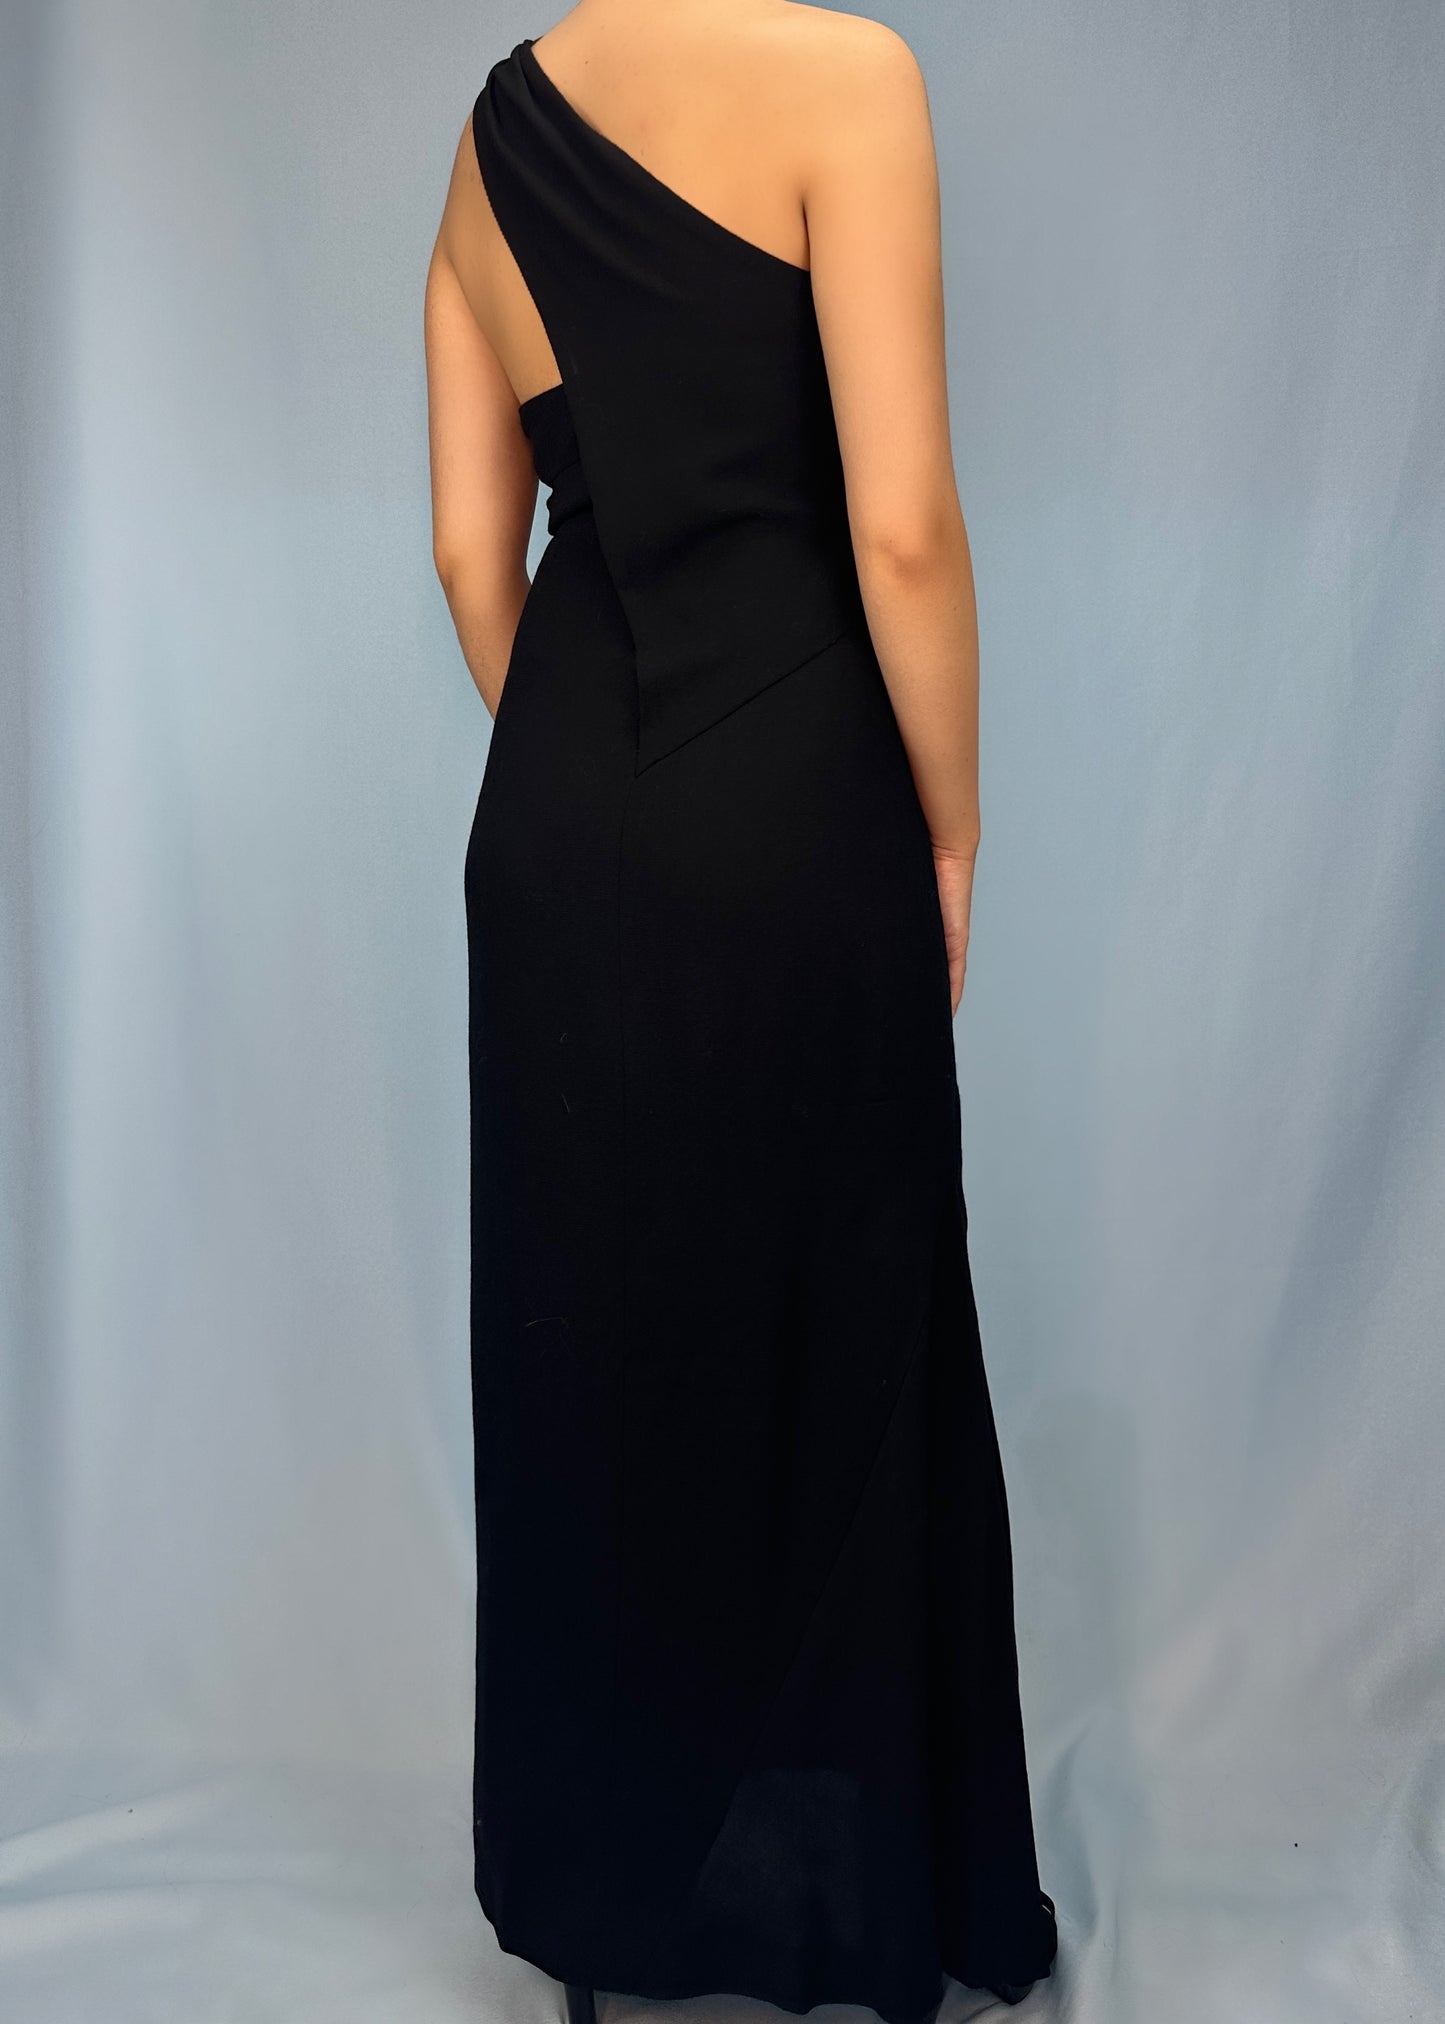 Chanel Fall 1998 Runway One Shoulder Draped Black Gown Dress